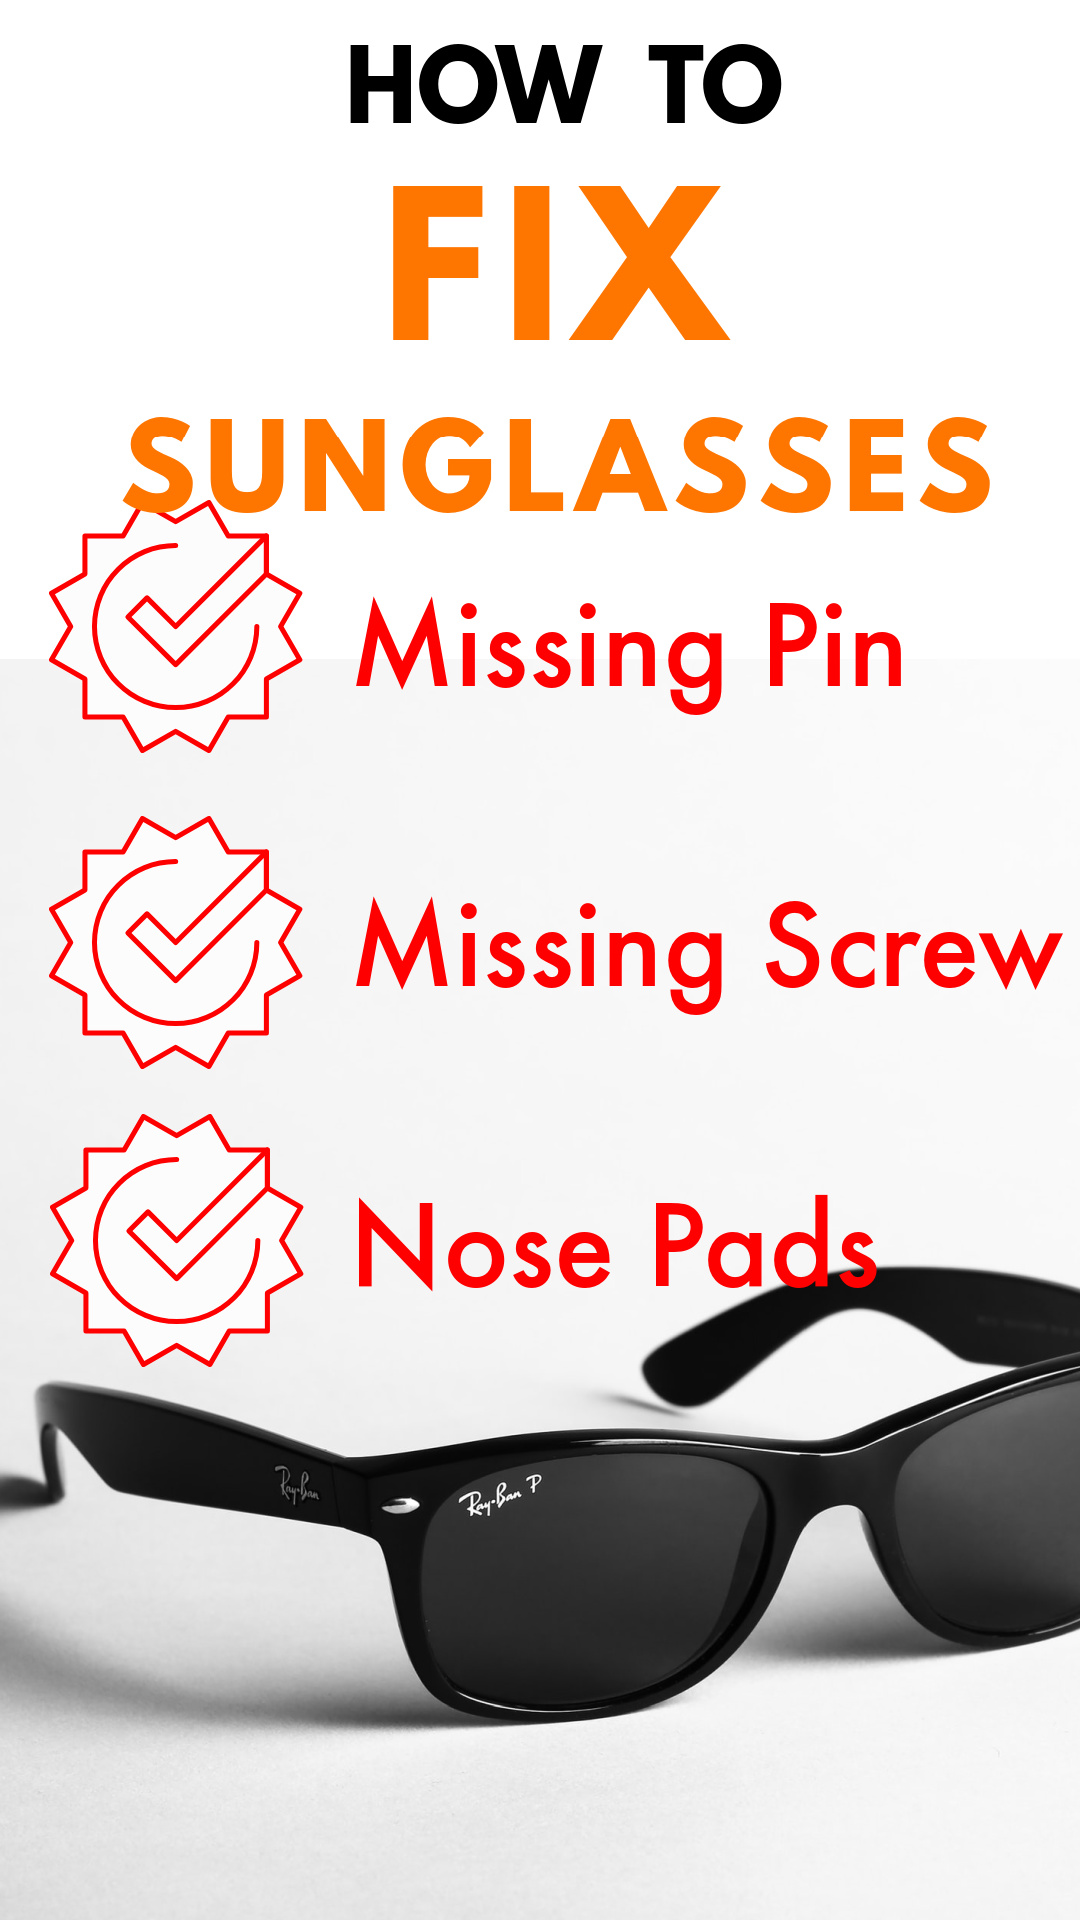 Ray-Ban 2176 Replacement Parts Cheap - ReplacementLenses.net - 100% ORIGINAL